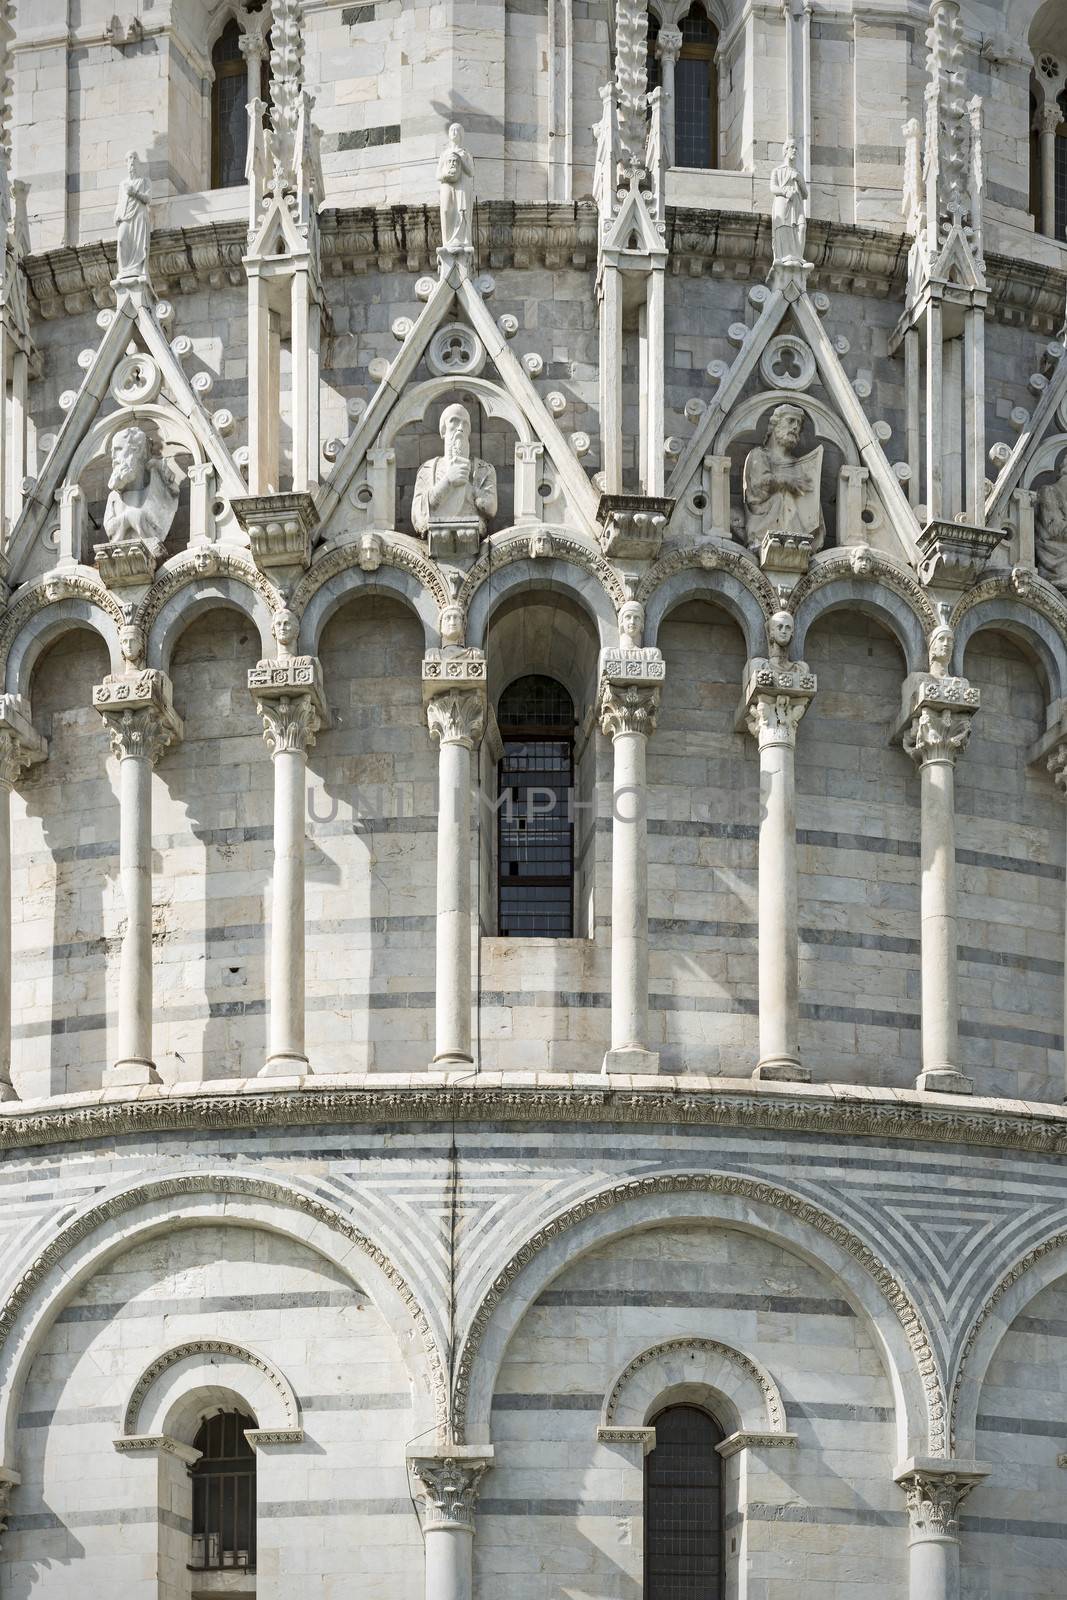 Closeup of the baptistery in Pisa, Italy